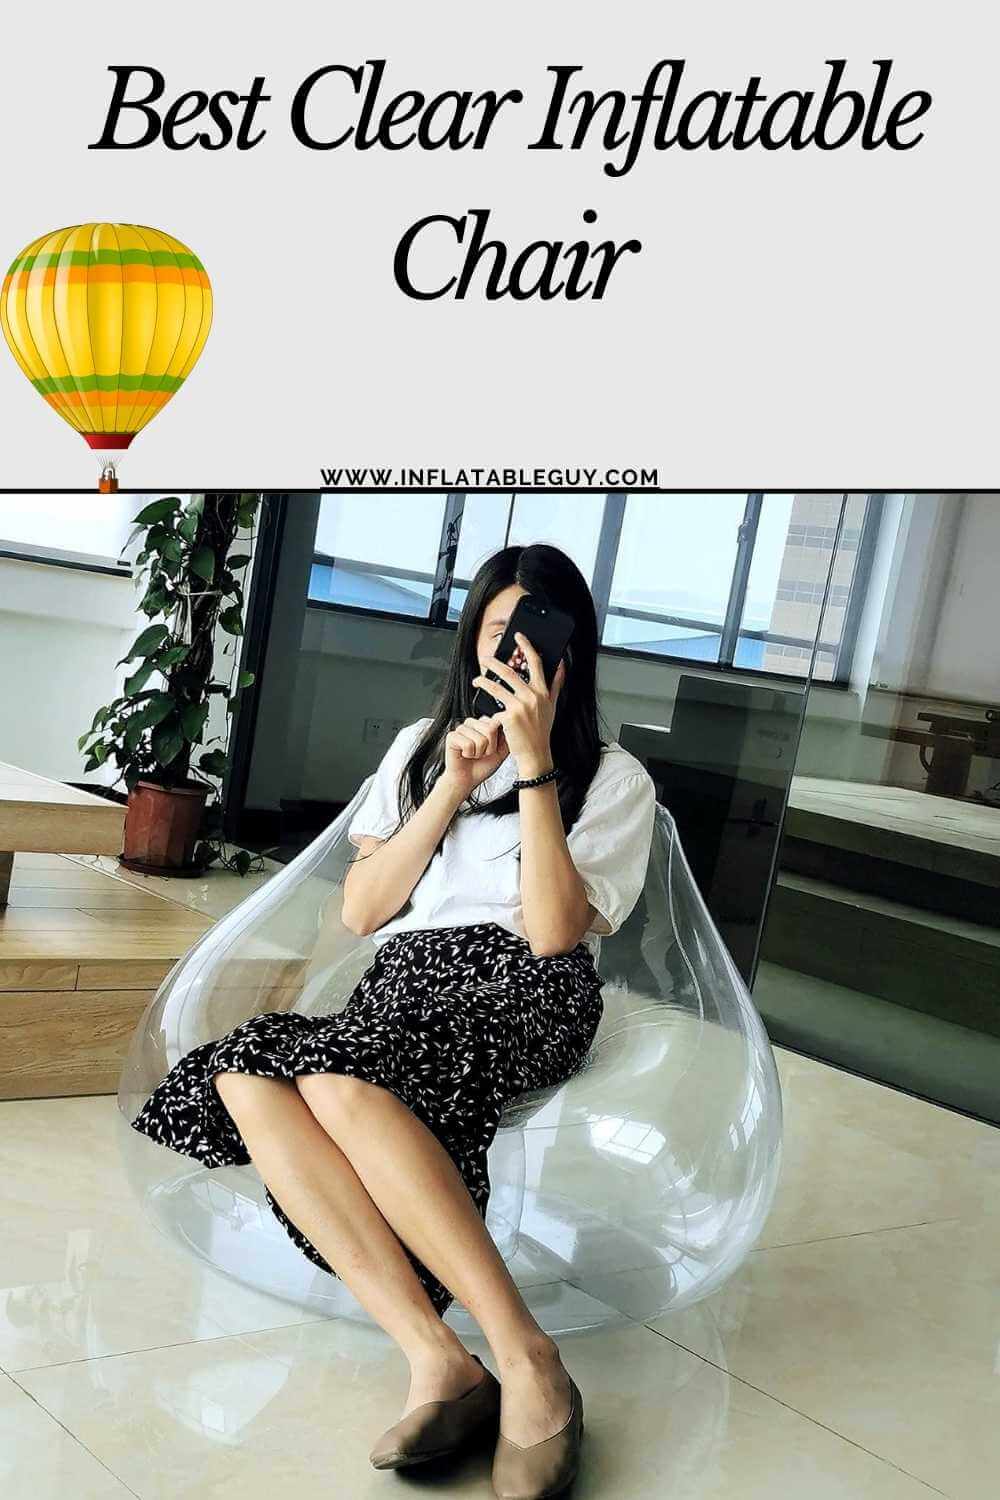 Best Clear Inflatable Chair